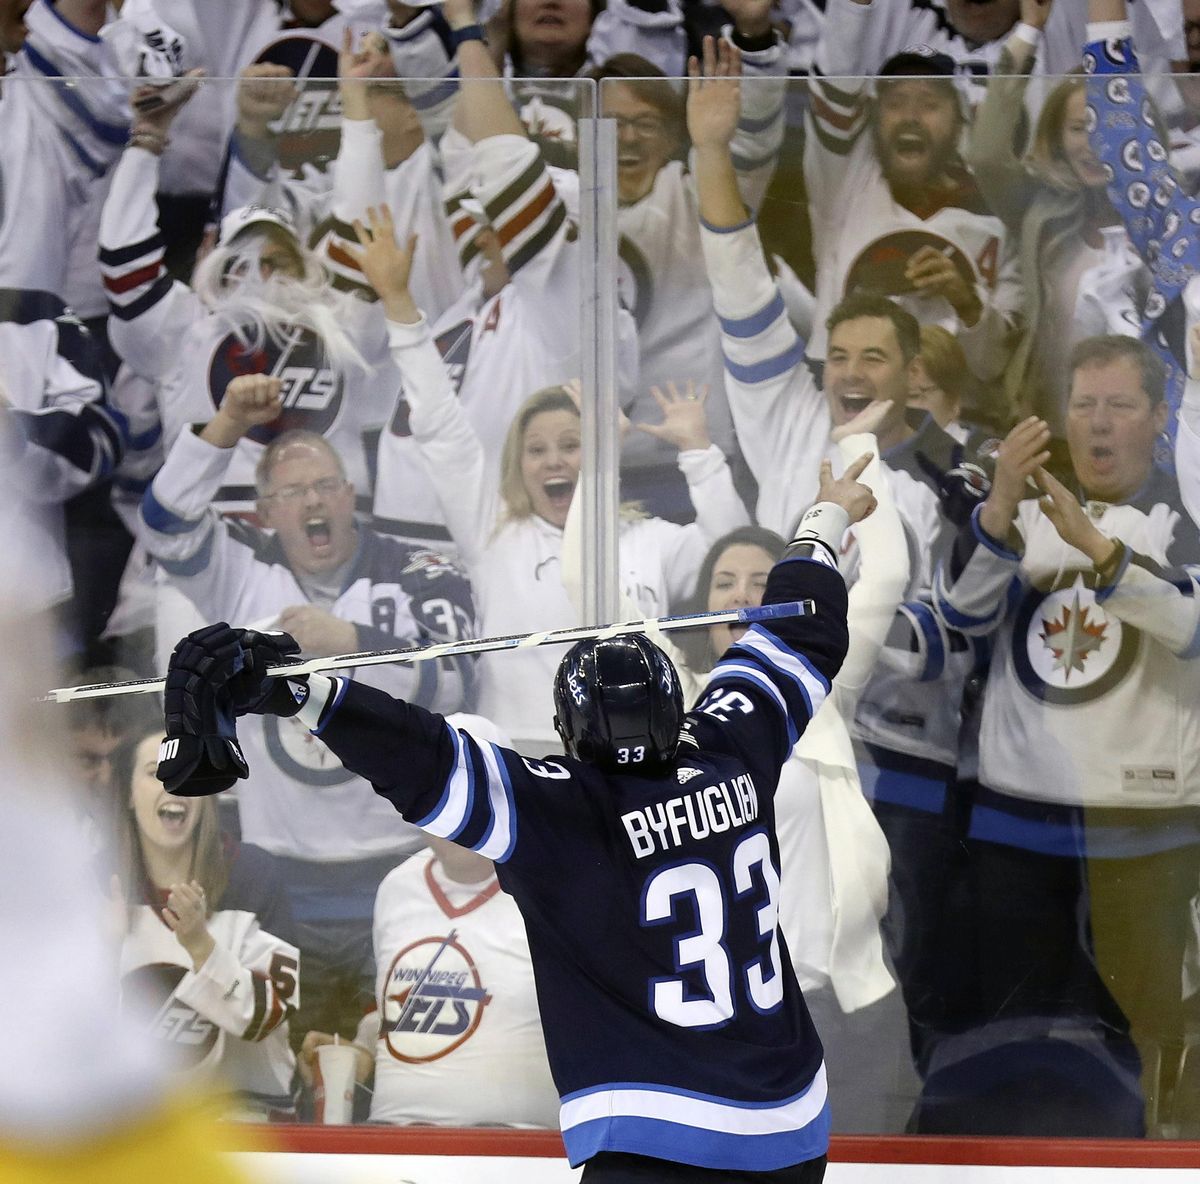 In this May 1, 2018, file photo, Winnipeg Jets’ Dustin Byfuglien (33) celebrates after scoring against the Nashville Predators during the second period of an NHL hockey playoff game in Winnipeg, Manitoba. The NHL is, indeed, back in “The ’Peg.” And the Jets are better than ever this year in preparing to play Game 7 of their second-round playoff series at Nashville on Thursday night, May 10. (Trevor Hagan / Canadian Press via AP)